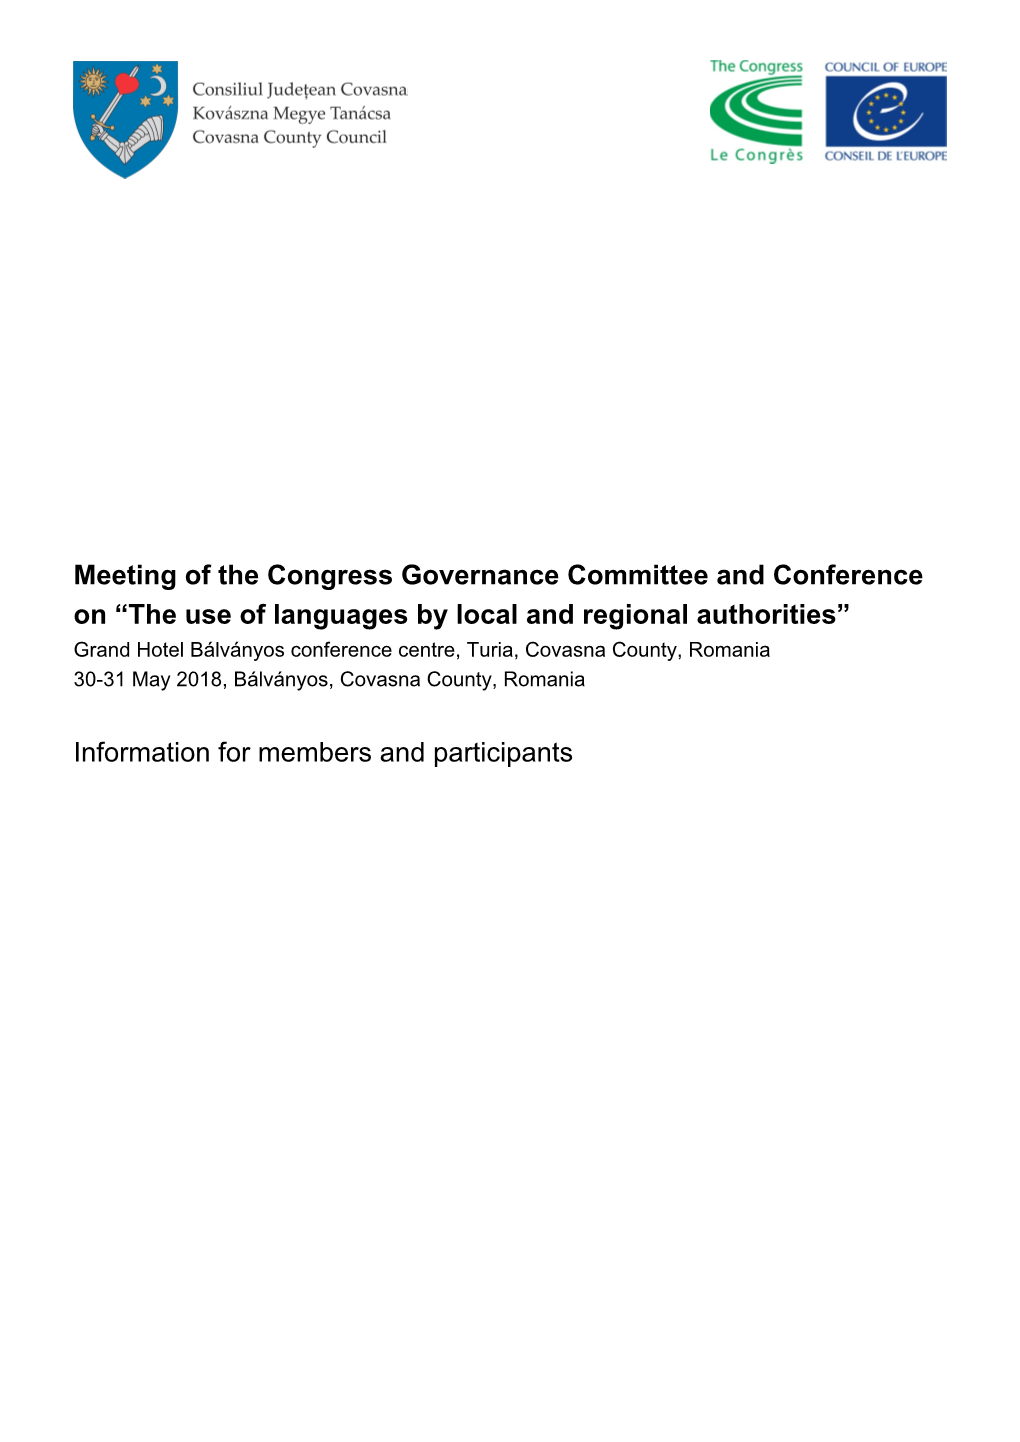 Meeting of the Congress Governance Committee and Conference on “The